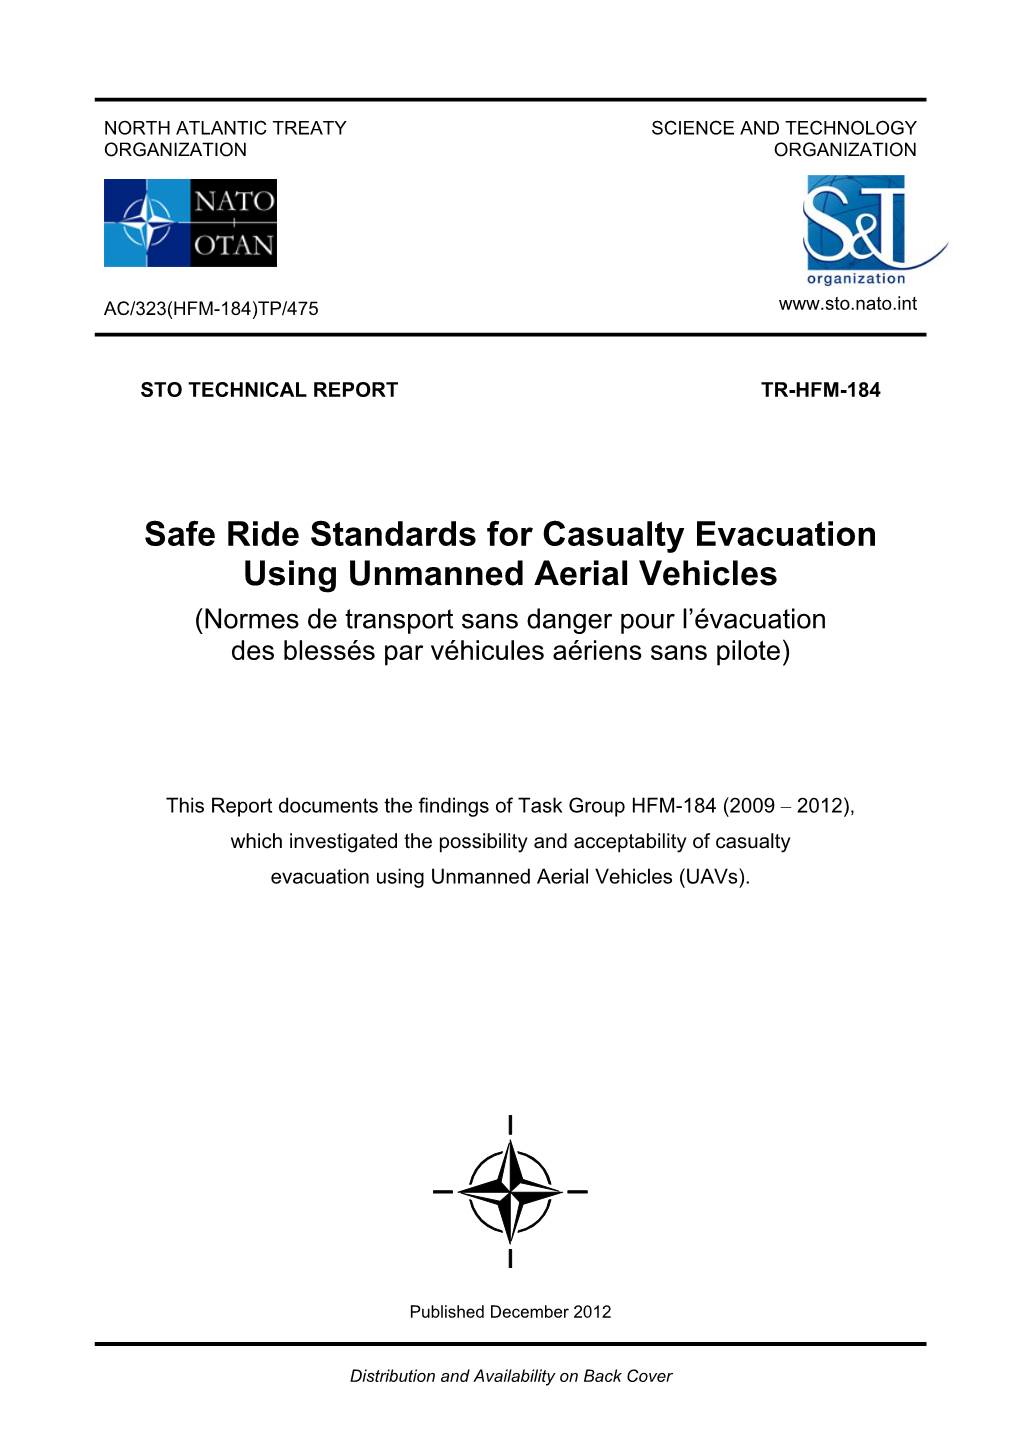 Safe Ride Standards for Casualty Evacuation Using Unmanned Aerial Vehicles